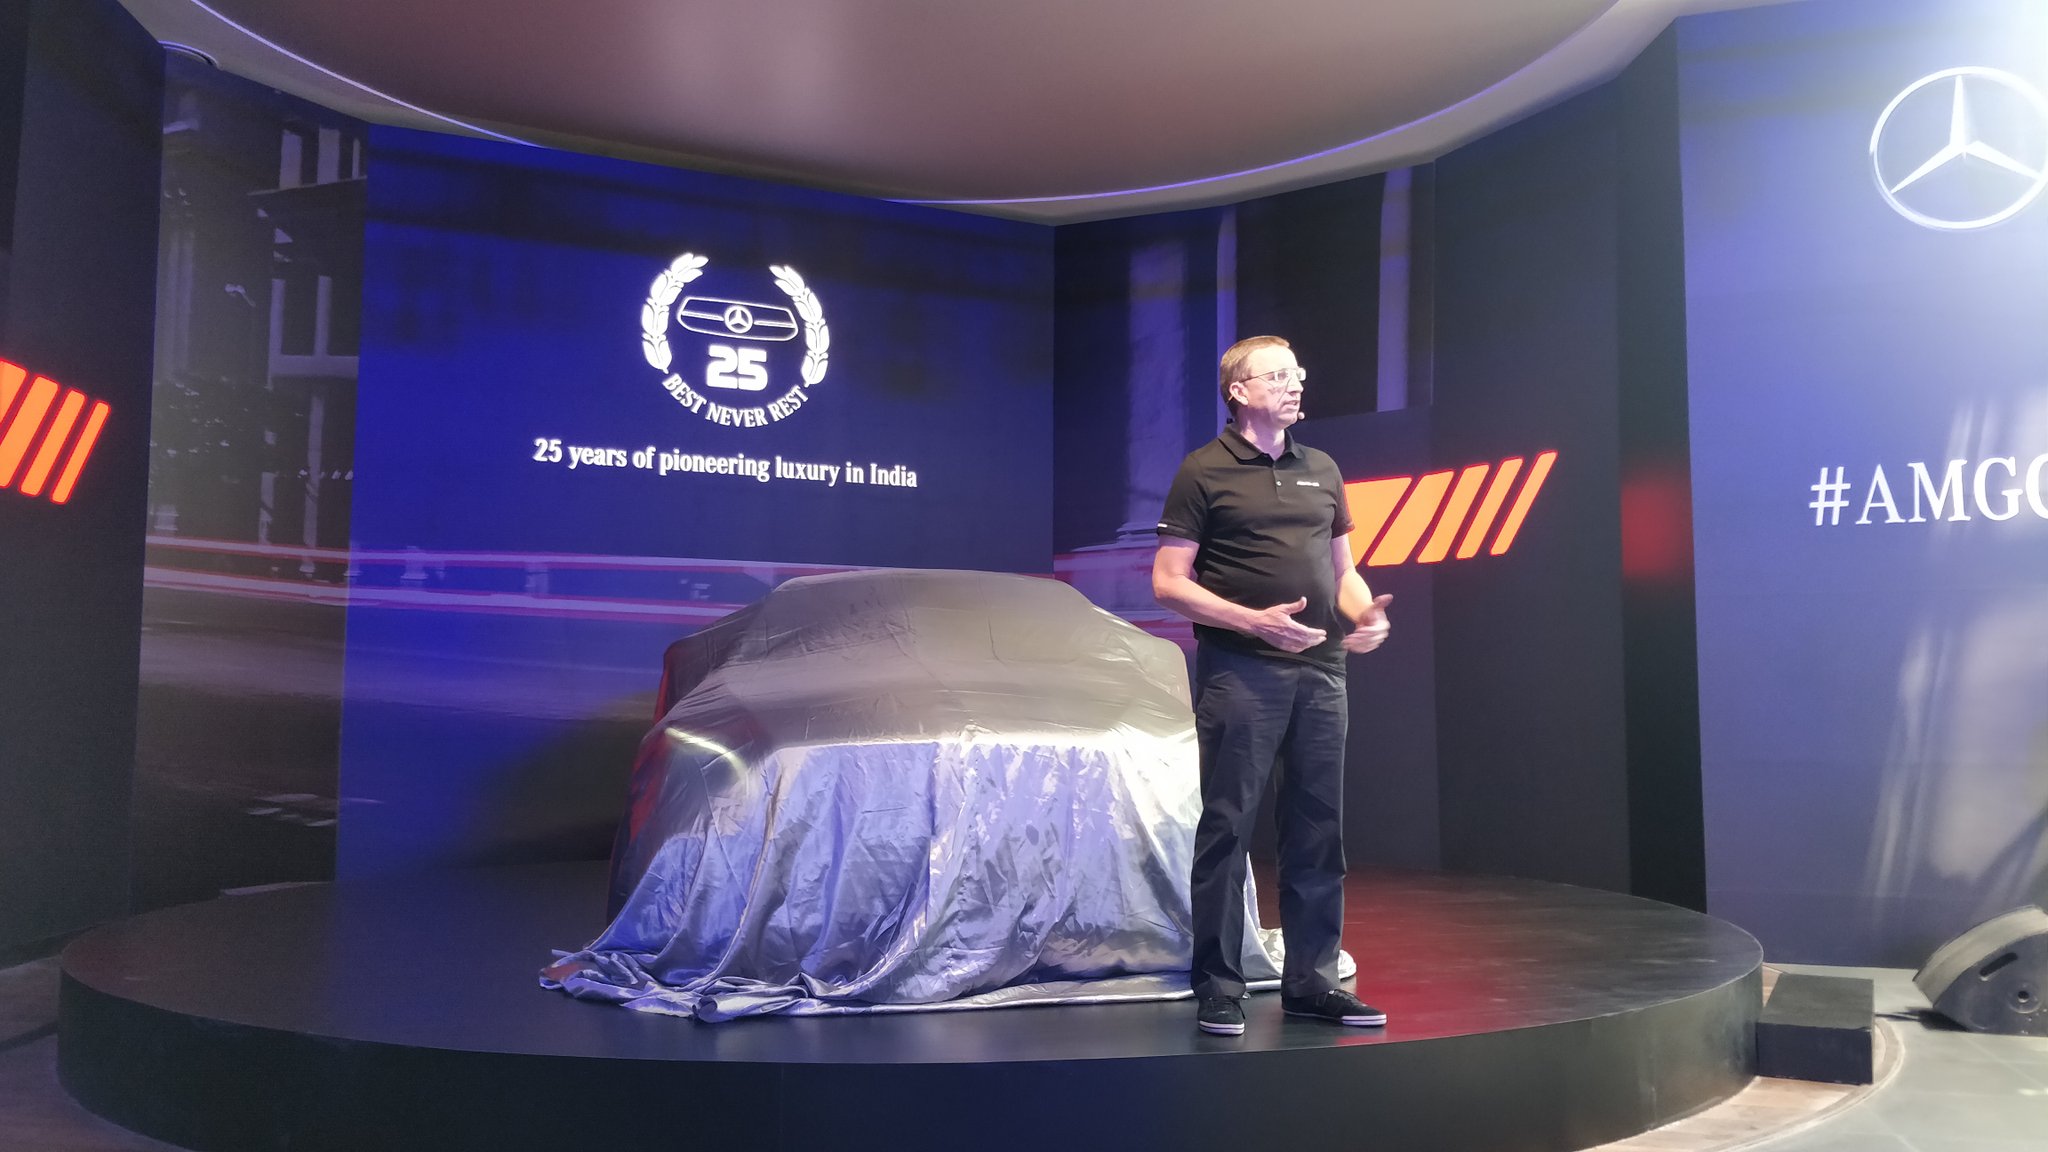 <p>We begin with Martin Schwenk, MD, of Mercedes-Benz India, saying the AMGC43 is the newest development in their&nbsp;strategy for India growth. The V Class and mobile servicing truck are other major initiatives.</p>